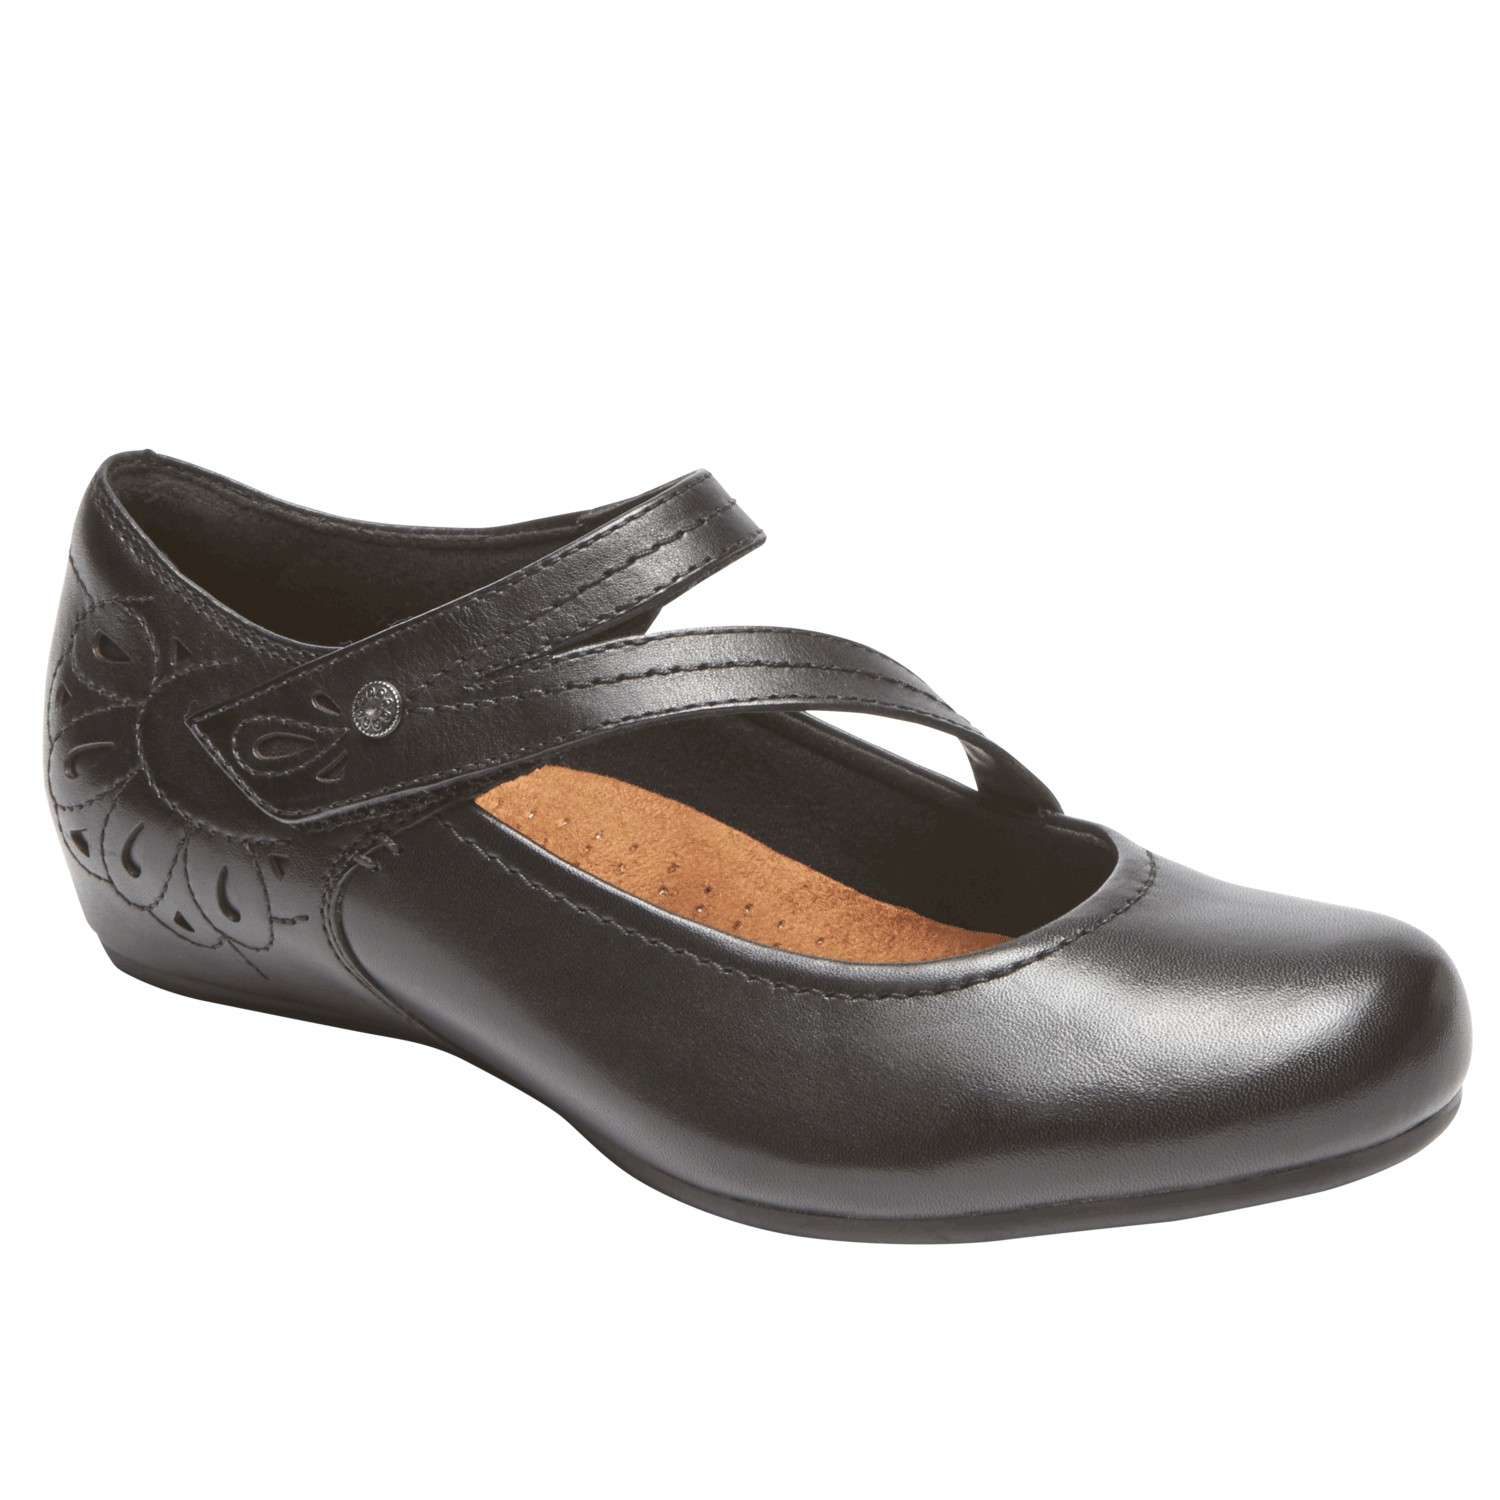 rockport women's mary jane shoes